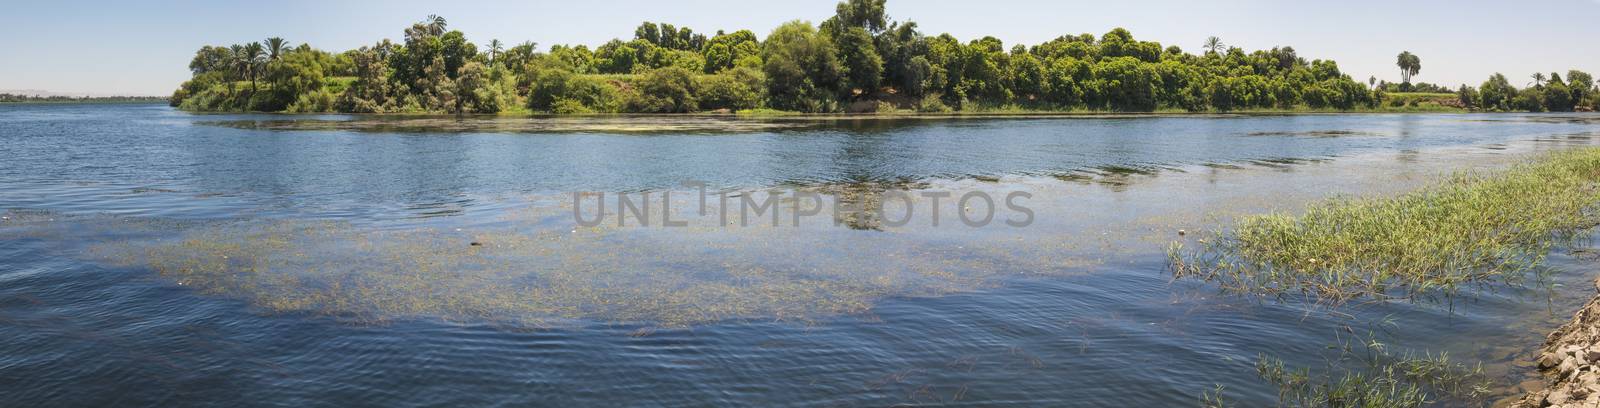 Panoramic landscape rural countryside view of large river nile with island and grass reeds